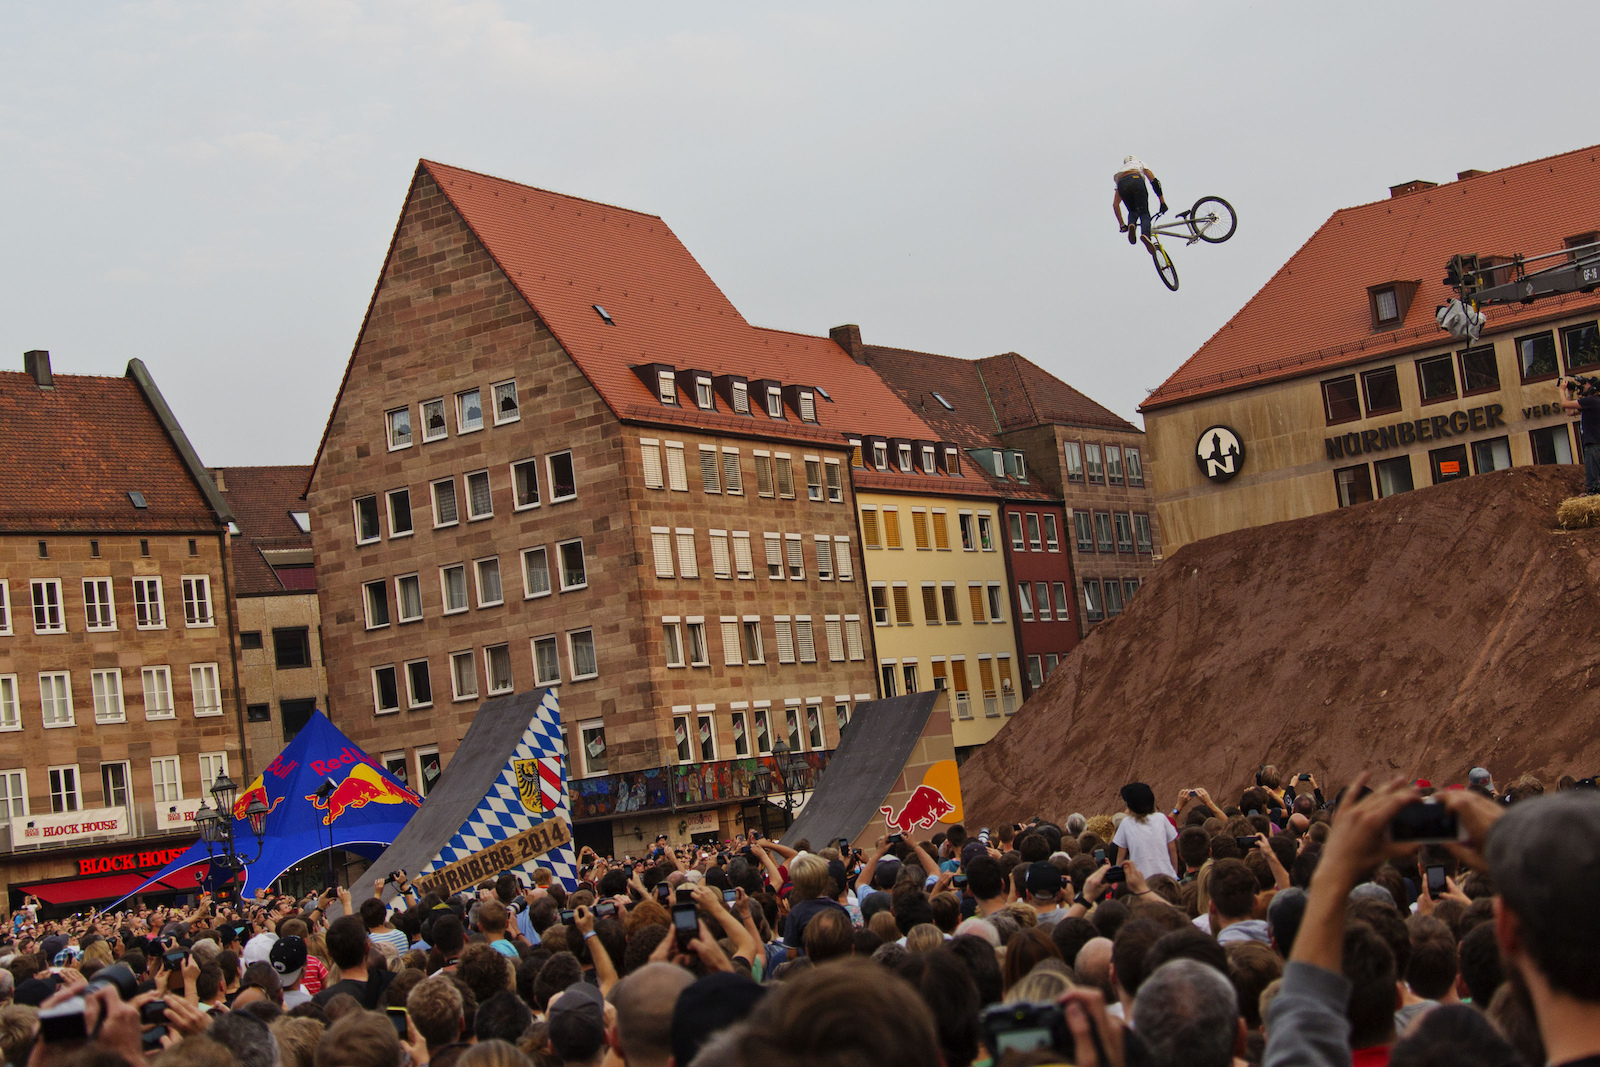 Lukas Knopf of Germany perfoms during the Telekom Best Trick Contest  at the Red Bull District Ride 2014 in Nuernberg Germany  on Friday September 5th 2014 // Daniel Grund/Red Bull Content Pool // P-20140906-00011 // Usage for editorial use only // Please go to www.redbullcontentpool.com for further information. //